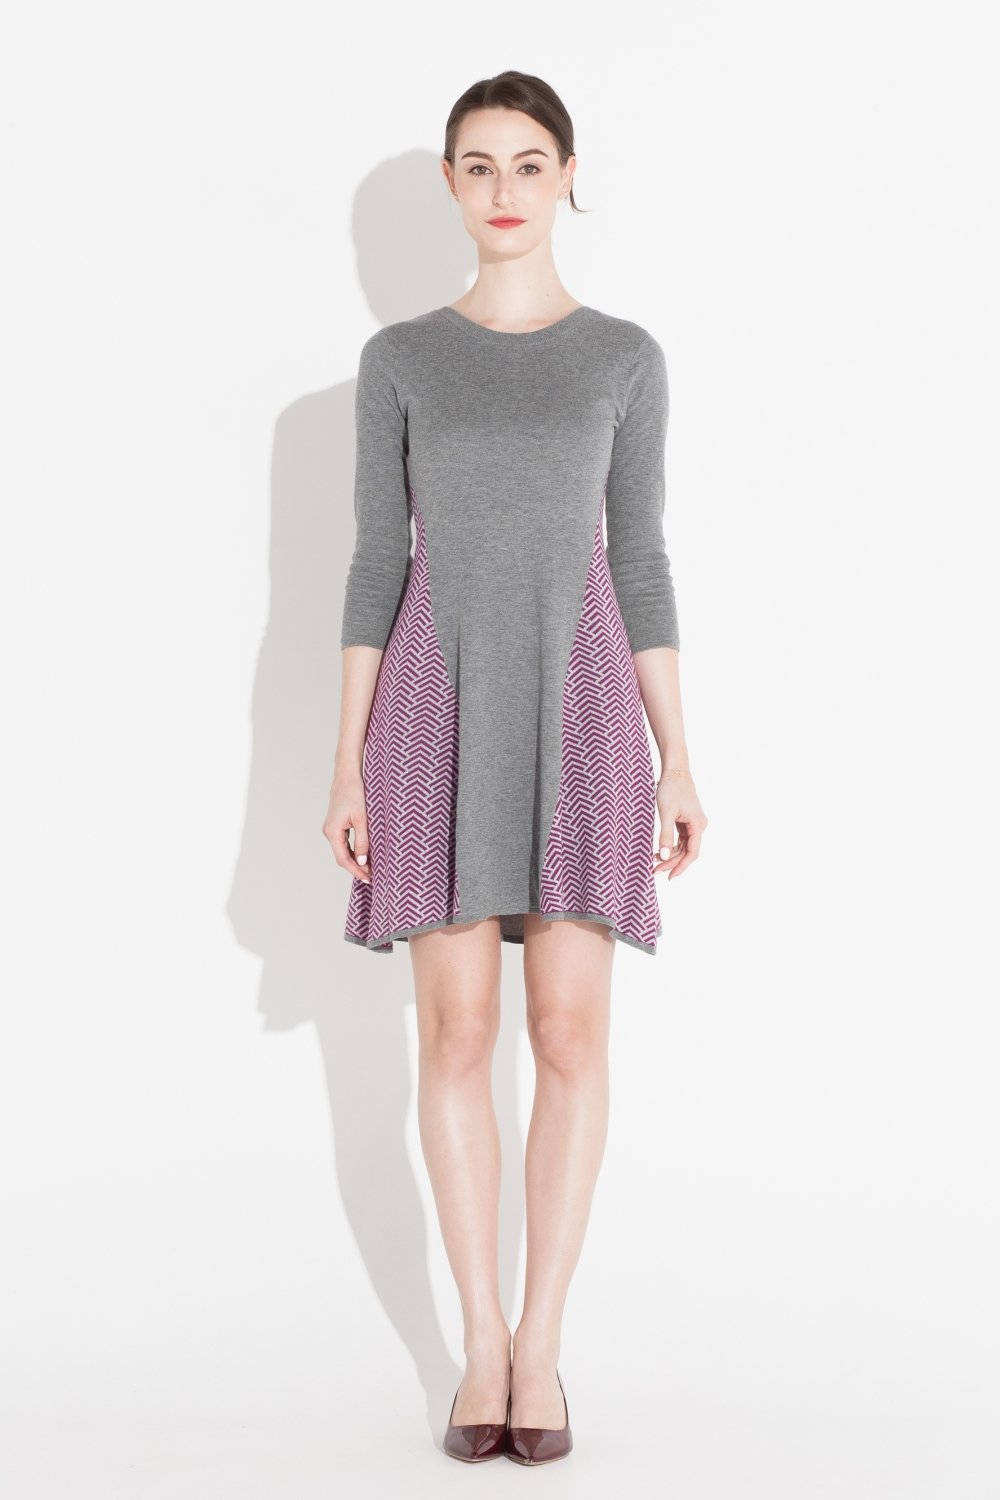 Tove & Libra Fit And Flared Gray And Purple Dress- Size XS, S, L, XL - Donated From Designer - The Fashion Foundation